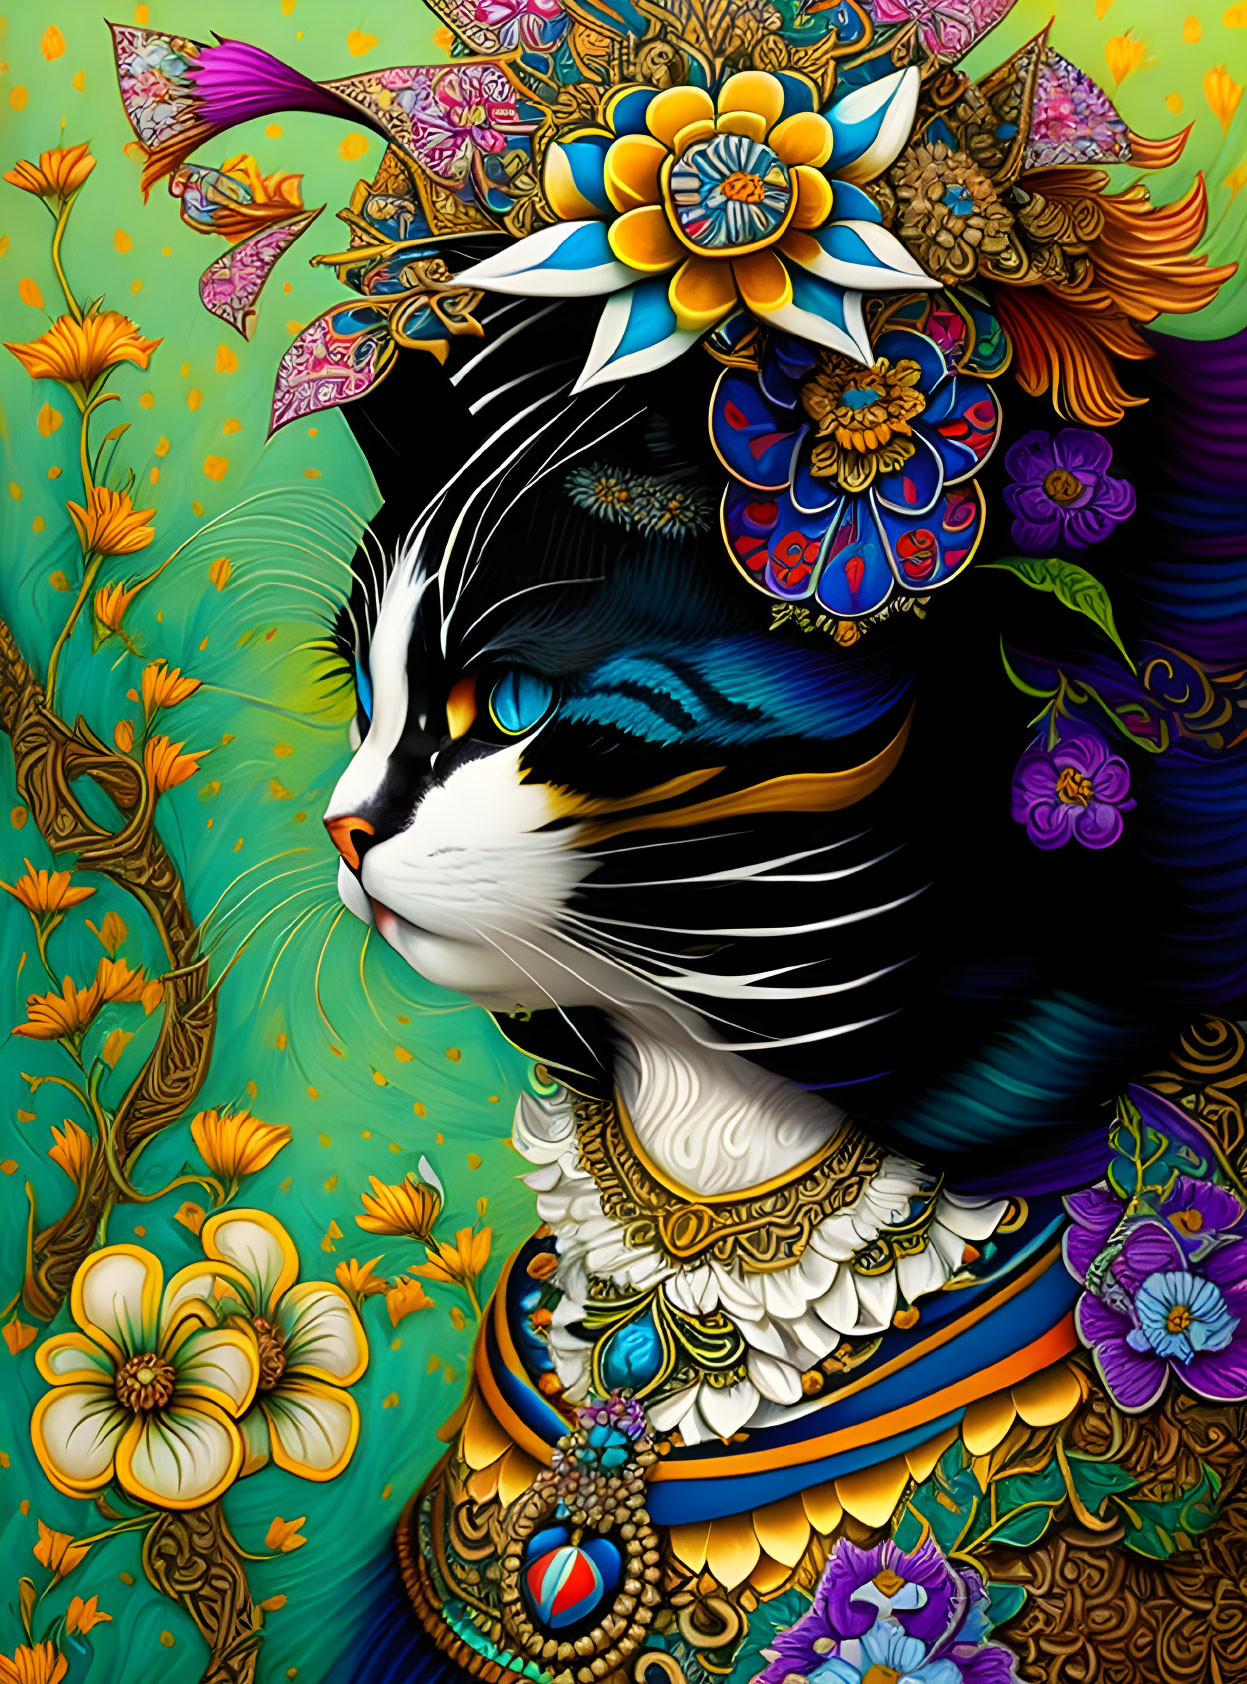 Colorful Cat Illustration with Floral and Mandala Patterns on Vibrant Background